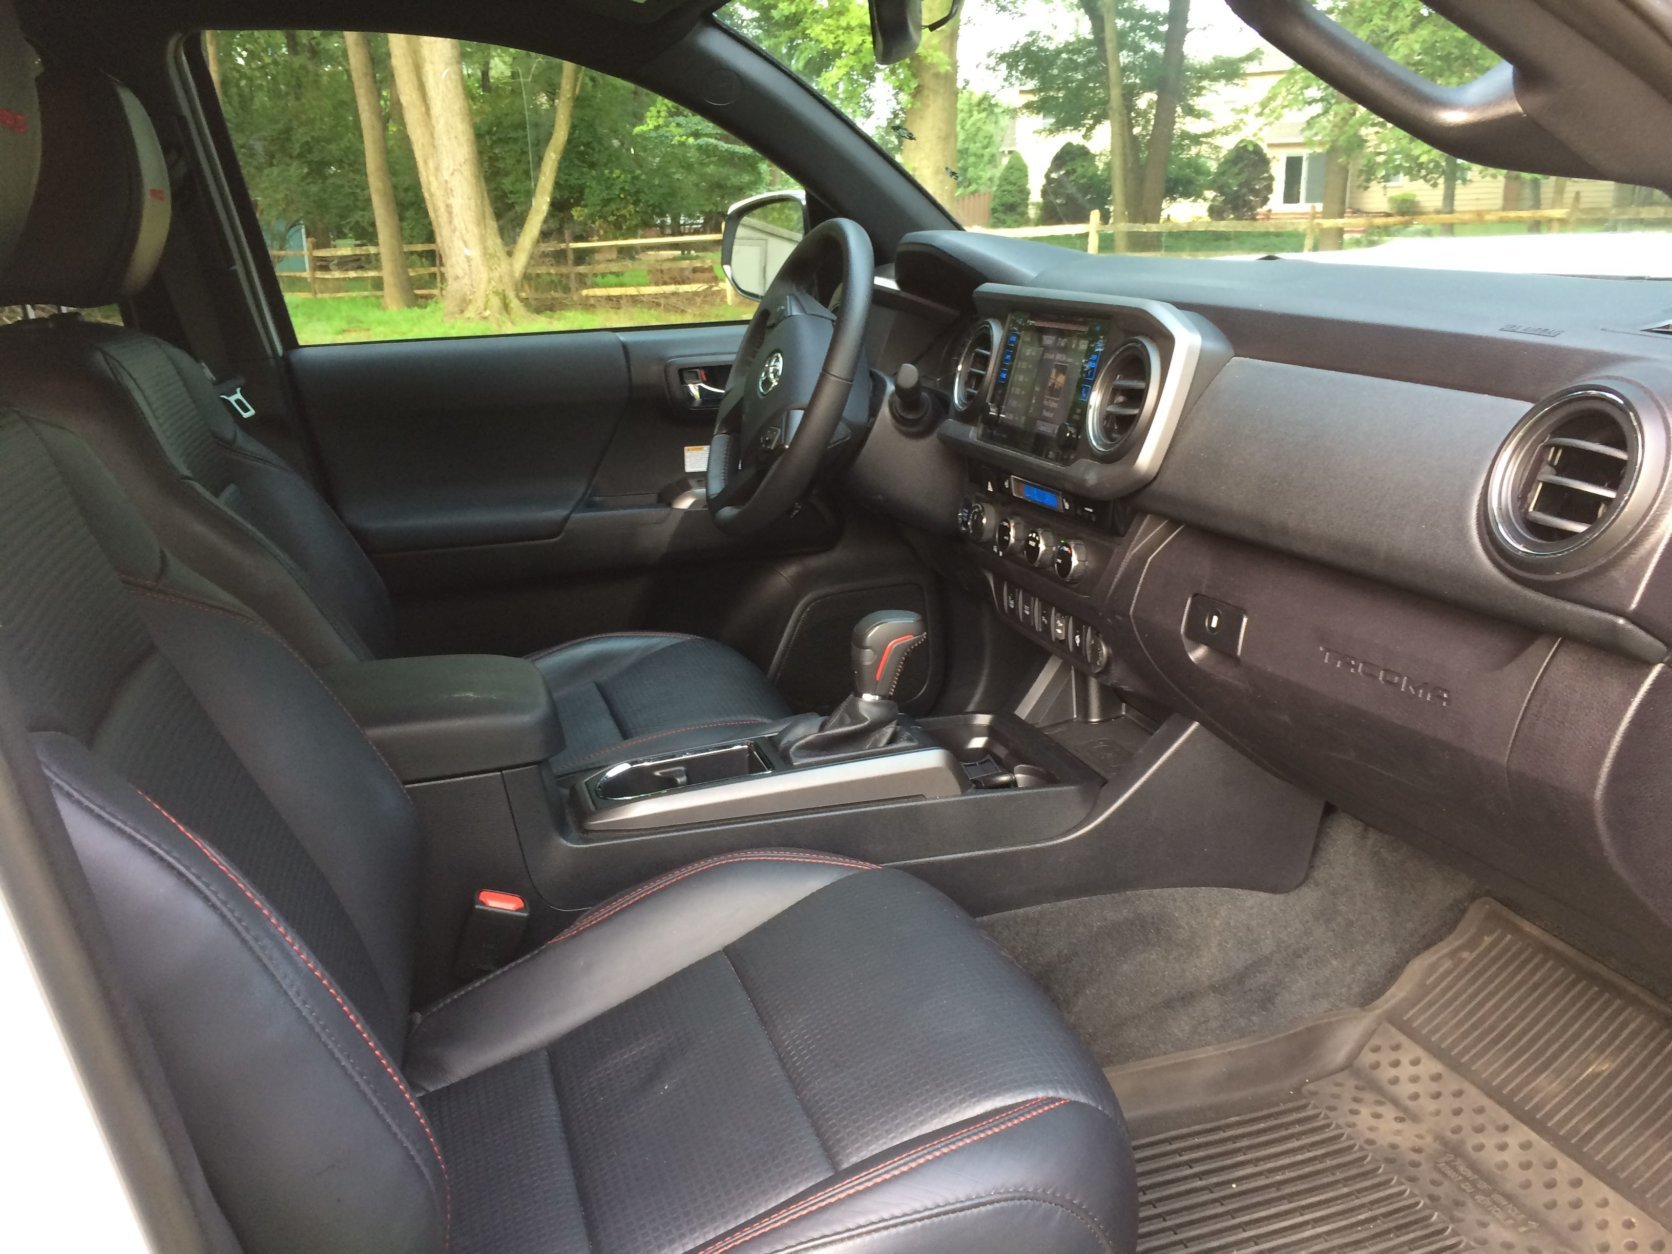 Inside the $44,814 Tacoma TRD, this truck is anything but roughing it with its leather-trimmed seats and steering wheel, so Parris said "Be careful what mess you track in." (WTOP/Mike Parris)